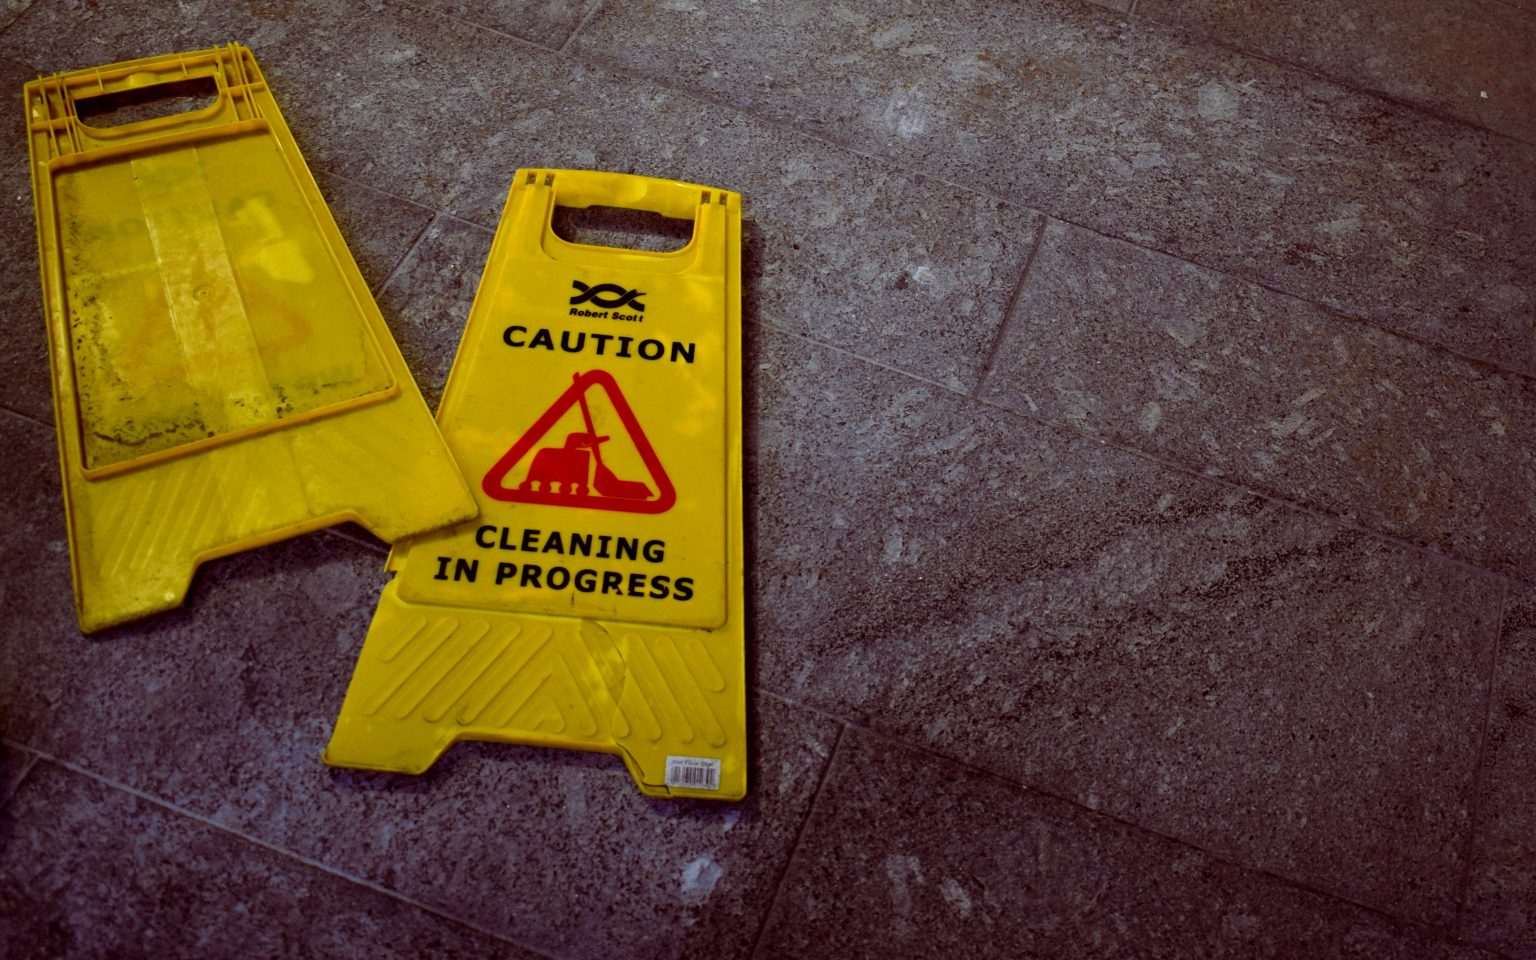 The Risks of not having Health and Safety Policies and Procedures in Place